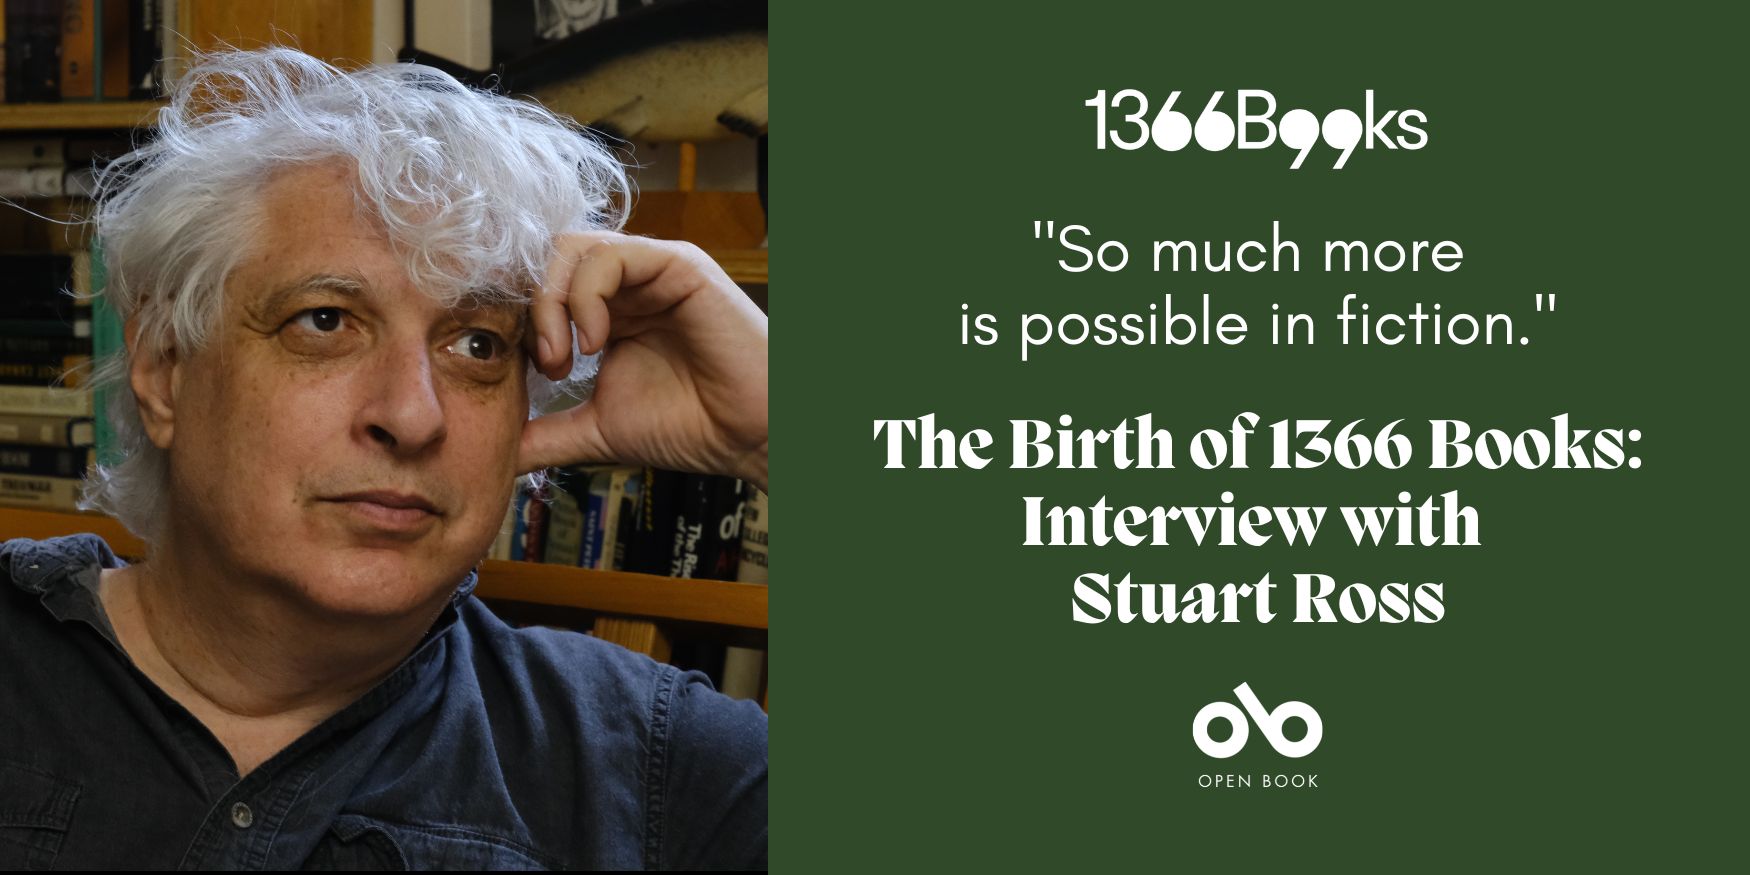 Photo of author Stuart Ross with a green background and text reading "There is so much more possible in fiction. The birth of 1366 Books: interview with Stuart Ross"